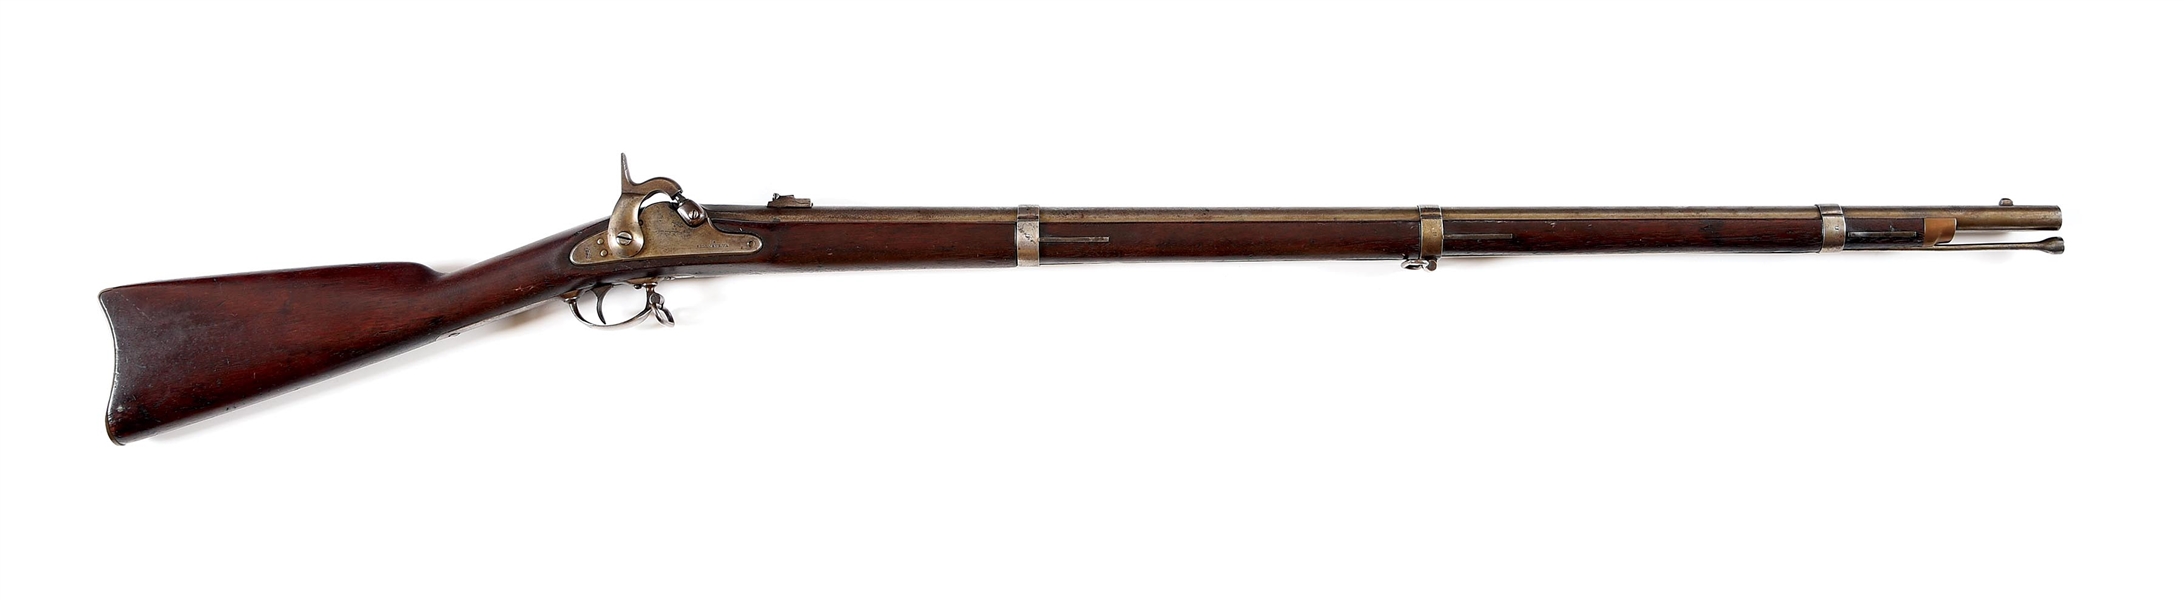 (A) CS RICHMOND PERCUSSION RIFLE MUSKET TYPE III ATTRIBUTED TO CHARLES HITZELBERGER, 1ST MARYLAND INFANTRY.